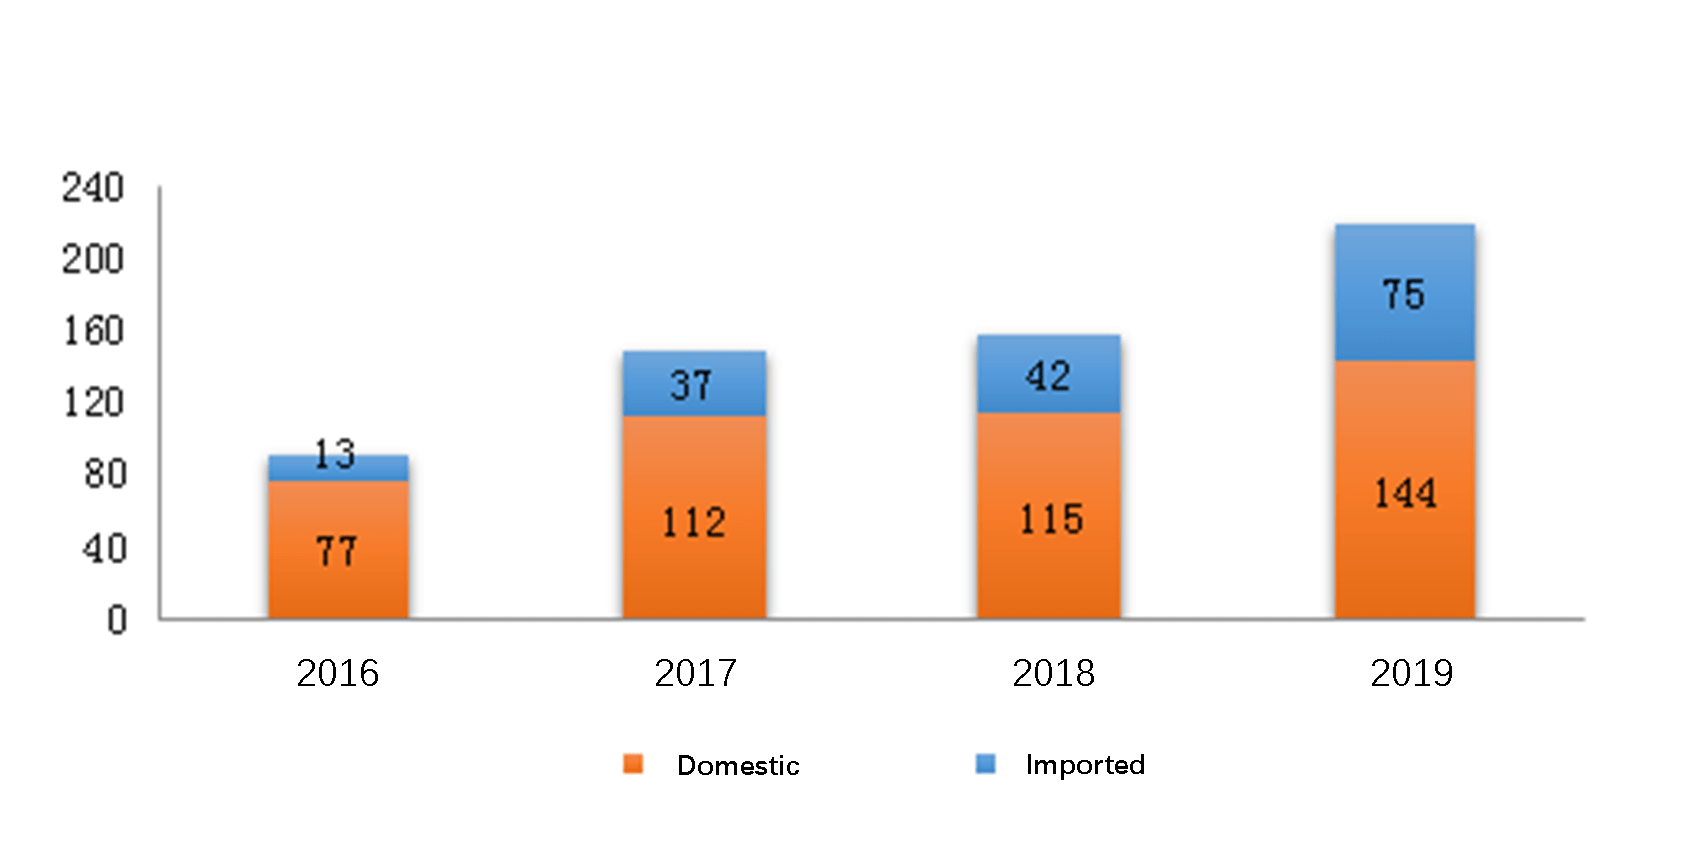 Fig. 7 Number of Innovative New Drug Registrations Approved from 2016 to 2019 for Domestic and Imported Chemical drugs